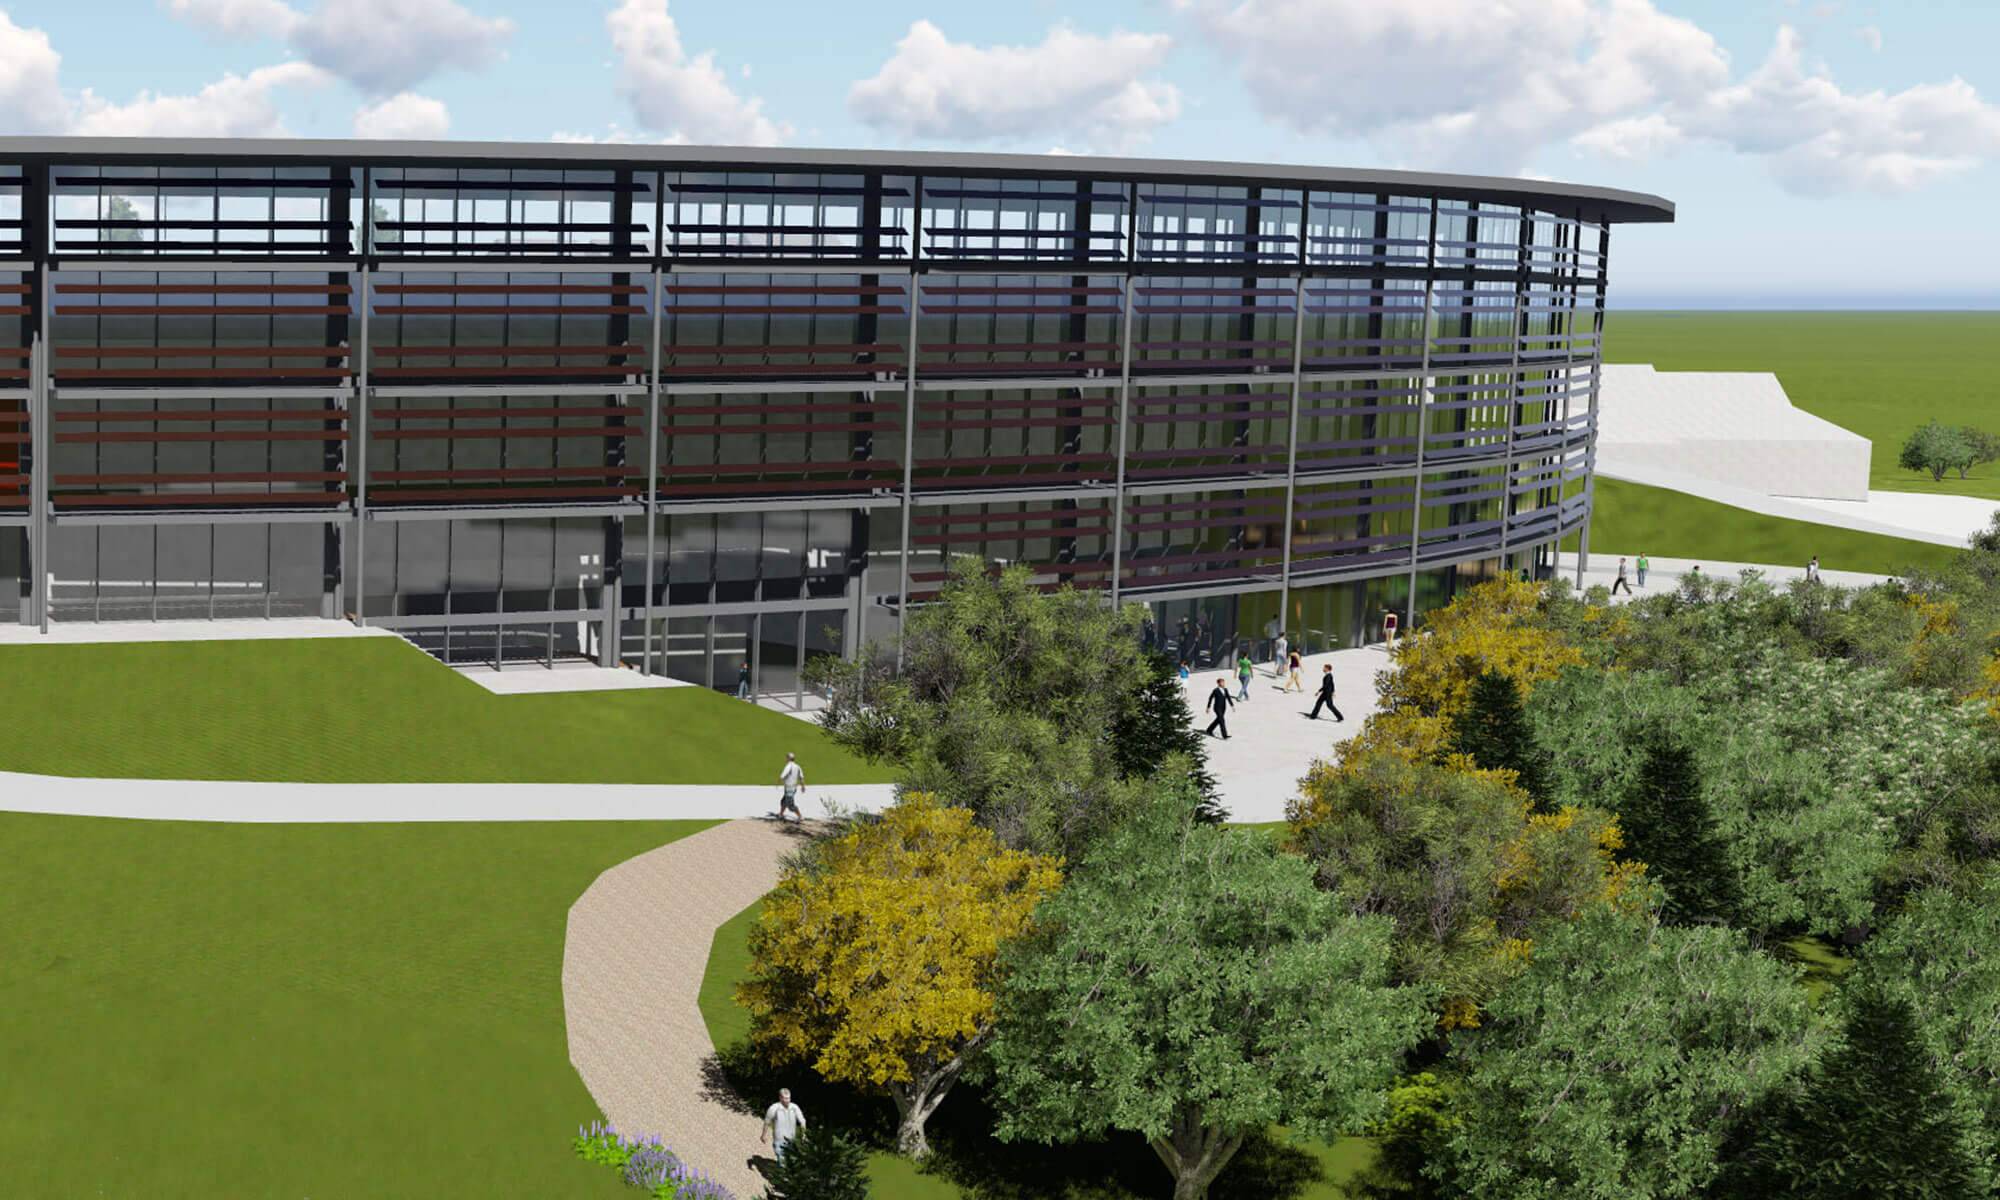 Irish college selects SALTO to secure its new campus